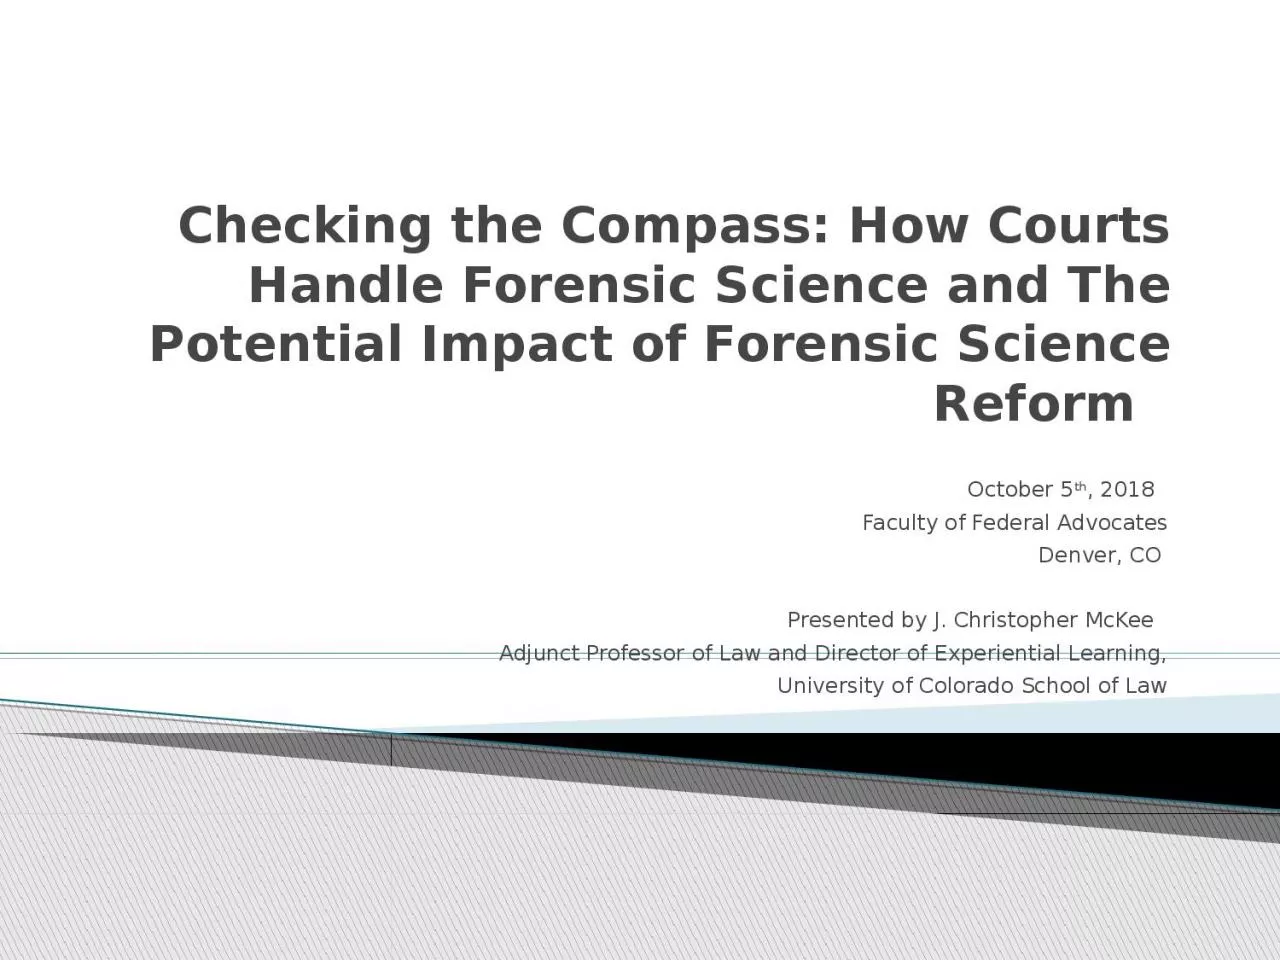 Checking the Compass: How Courts Handle Forensic Science and The Potential Impact of Forensic